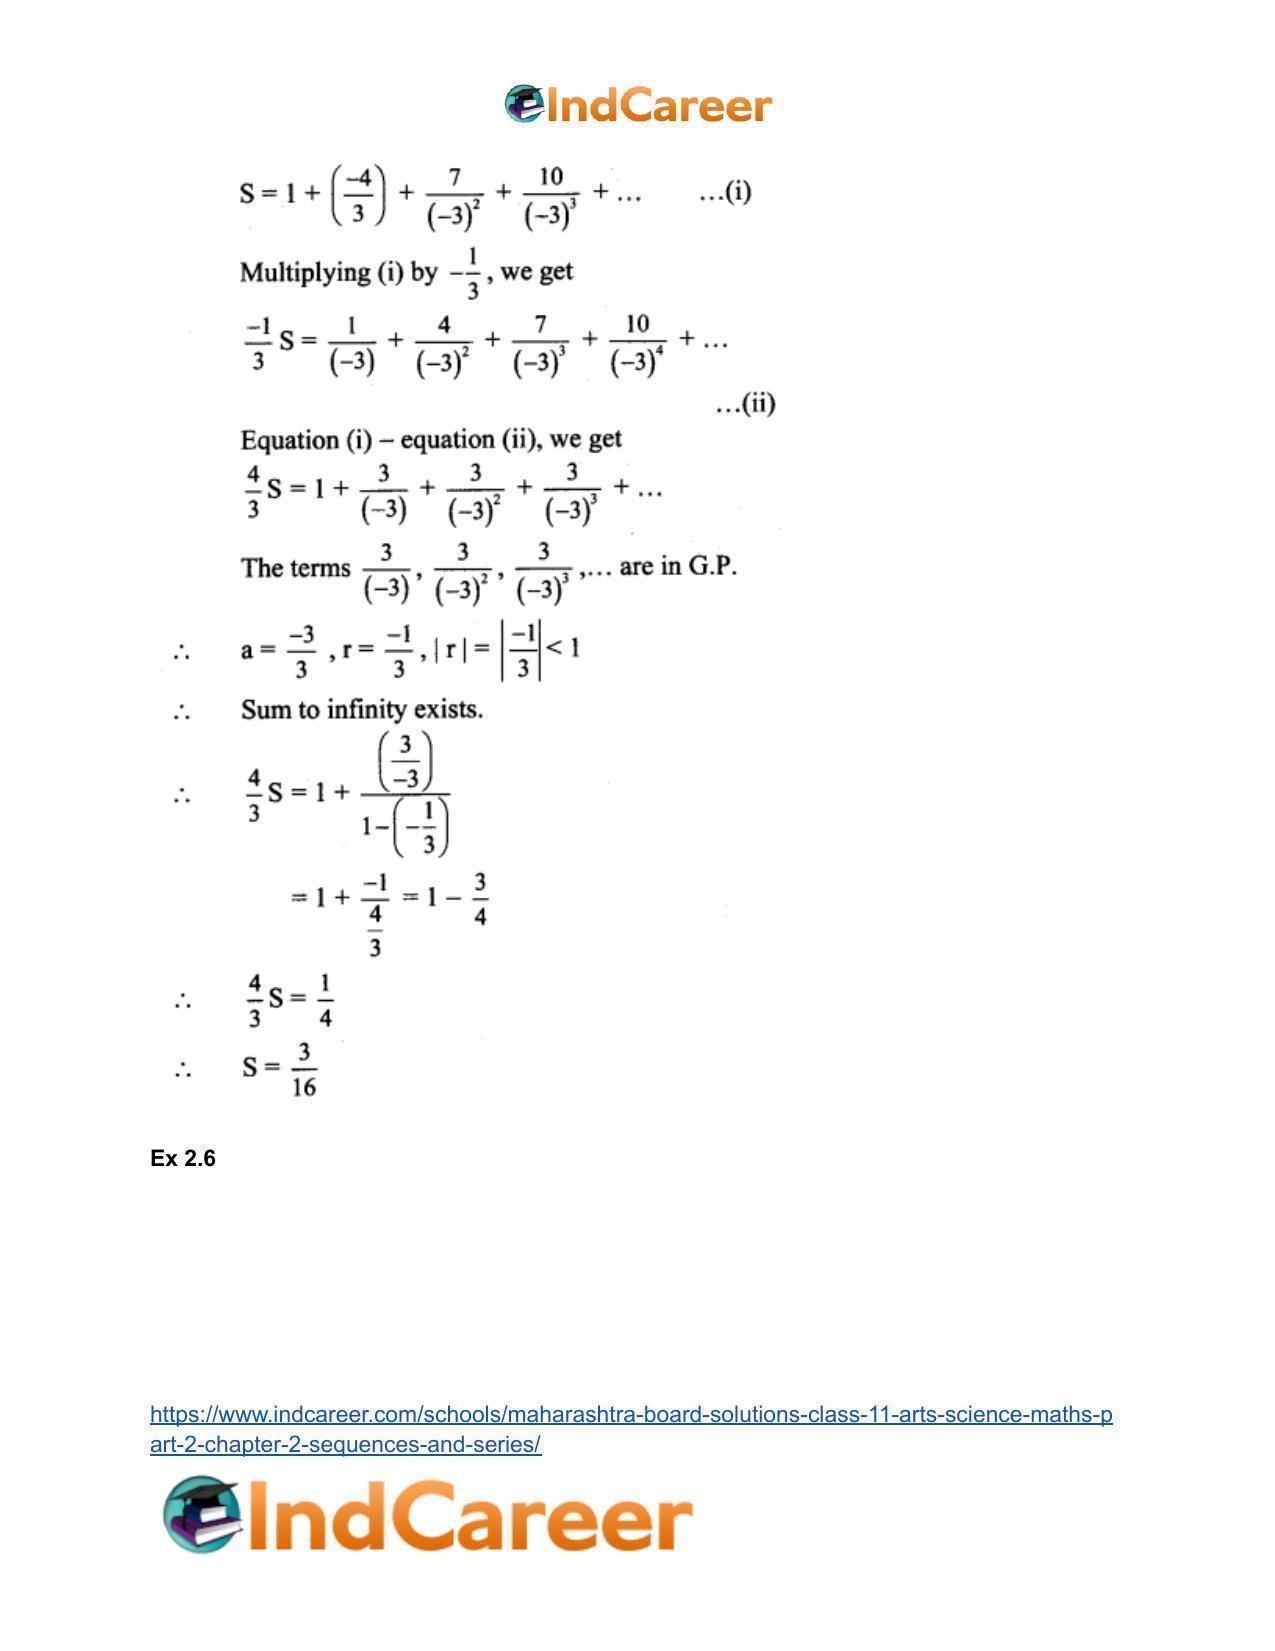 Maharashtra Board Solutions Class 11-Arts & Science Maths (Part 2): Chapter 2- Sequences and Series - Page 67